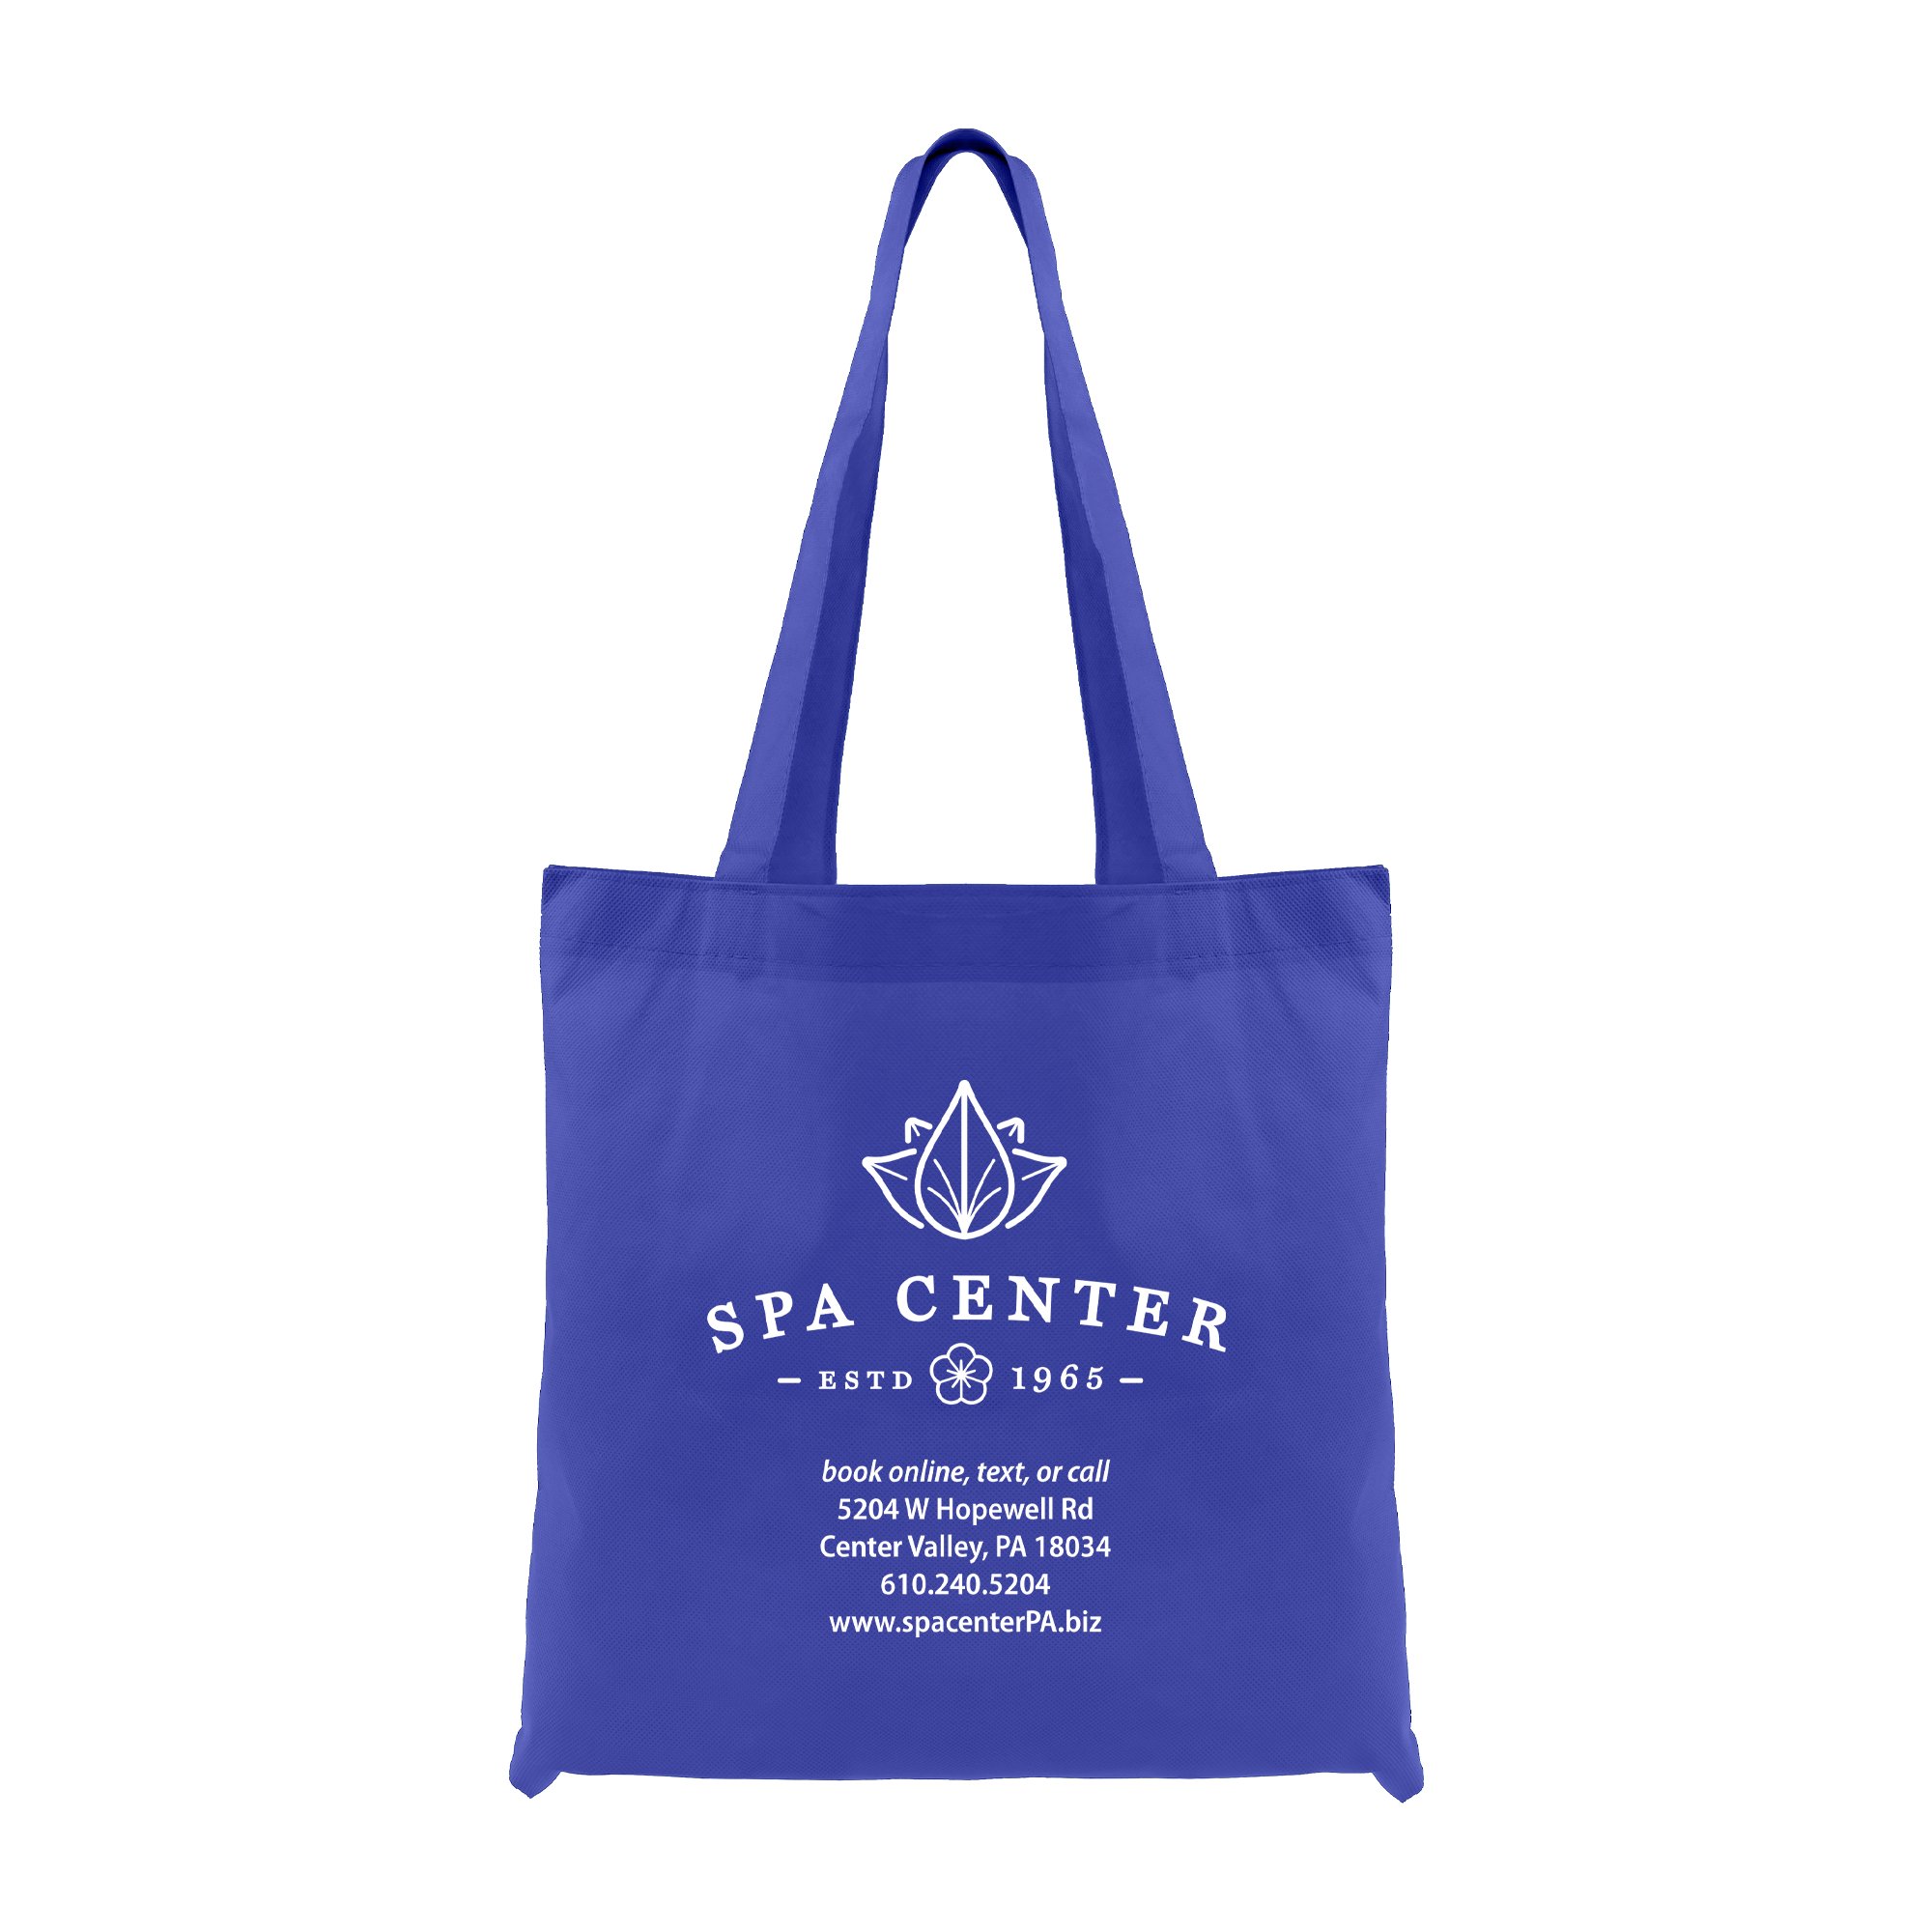 Promotional Water-Resistant Budget Shopper Tote